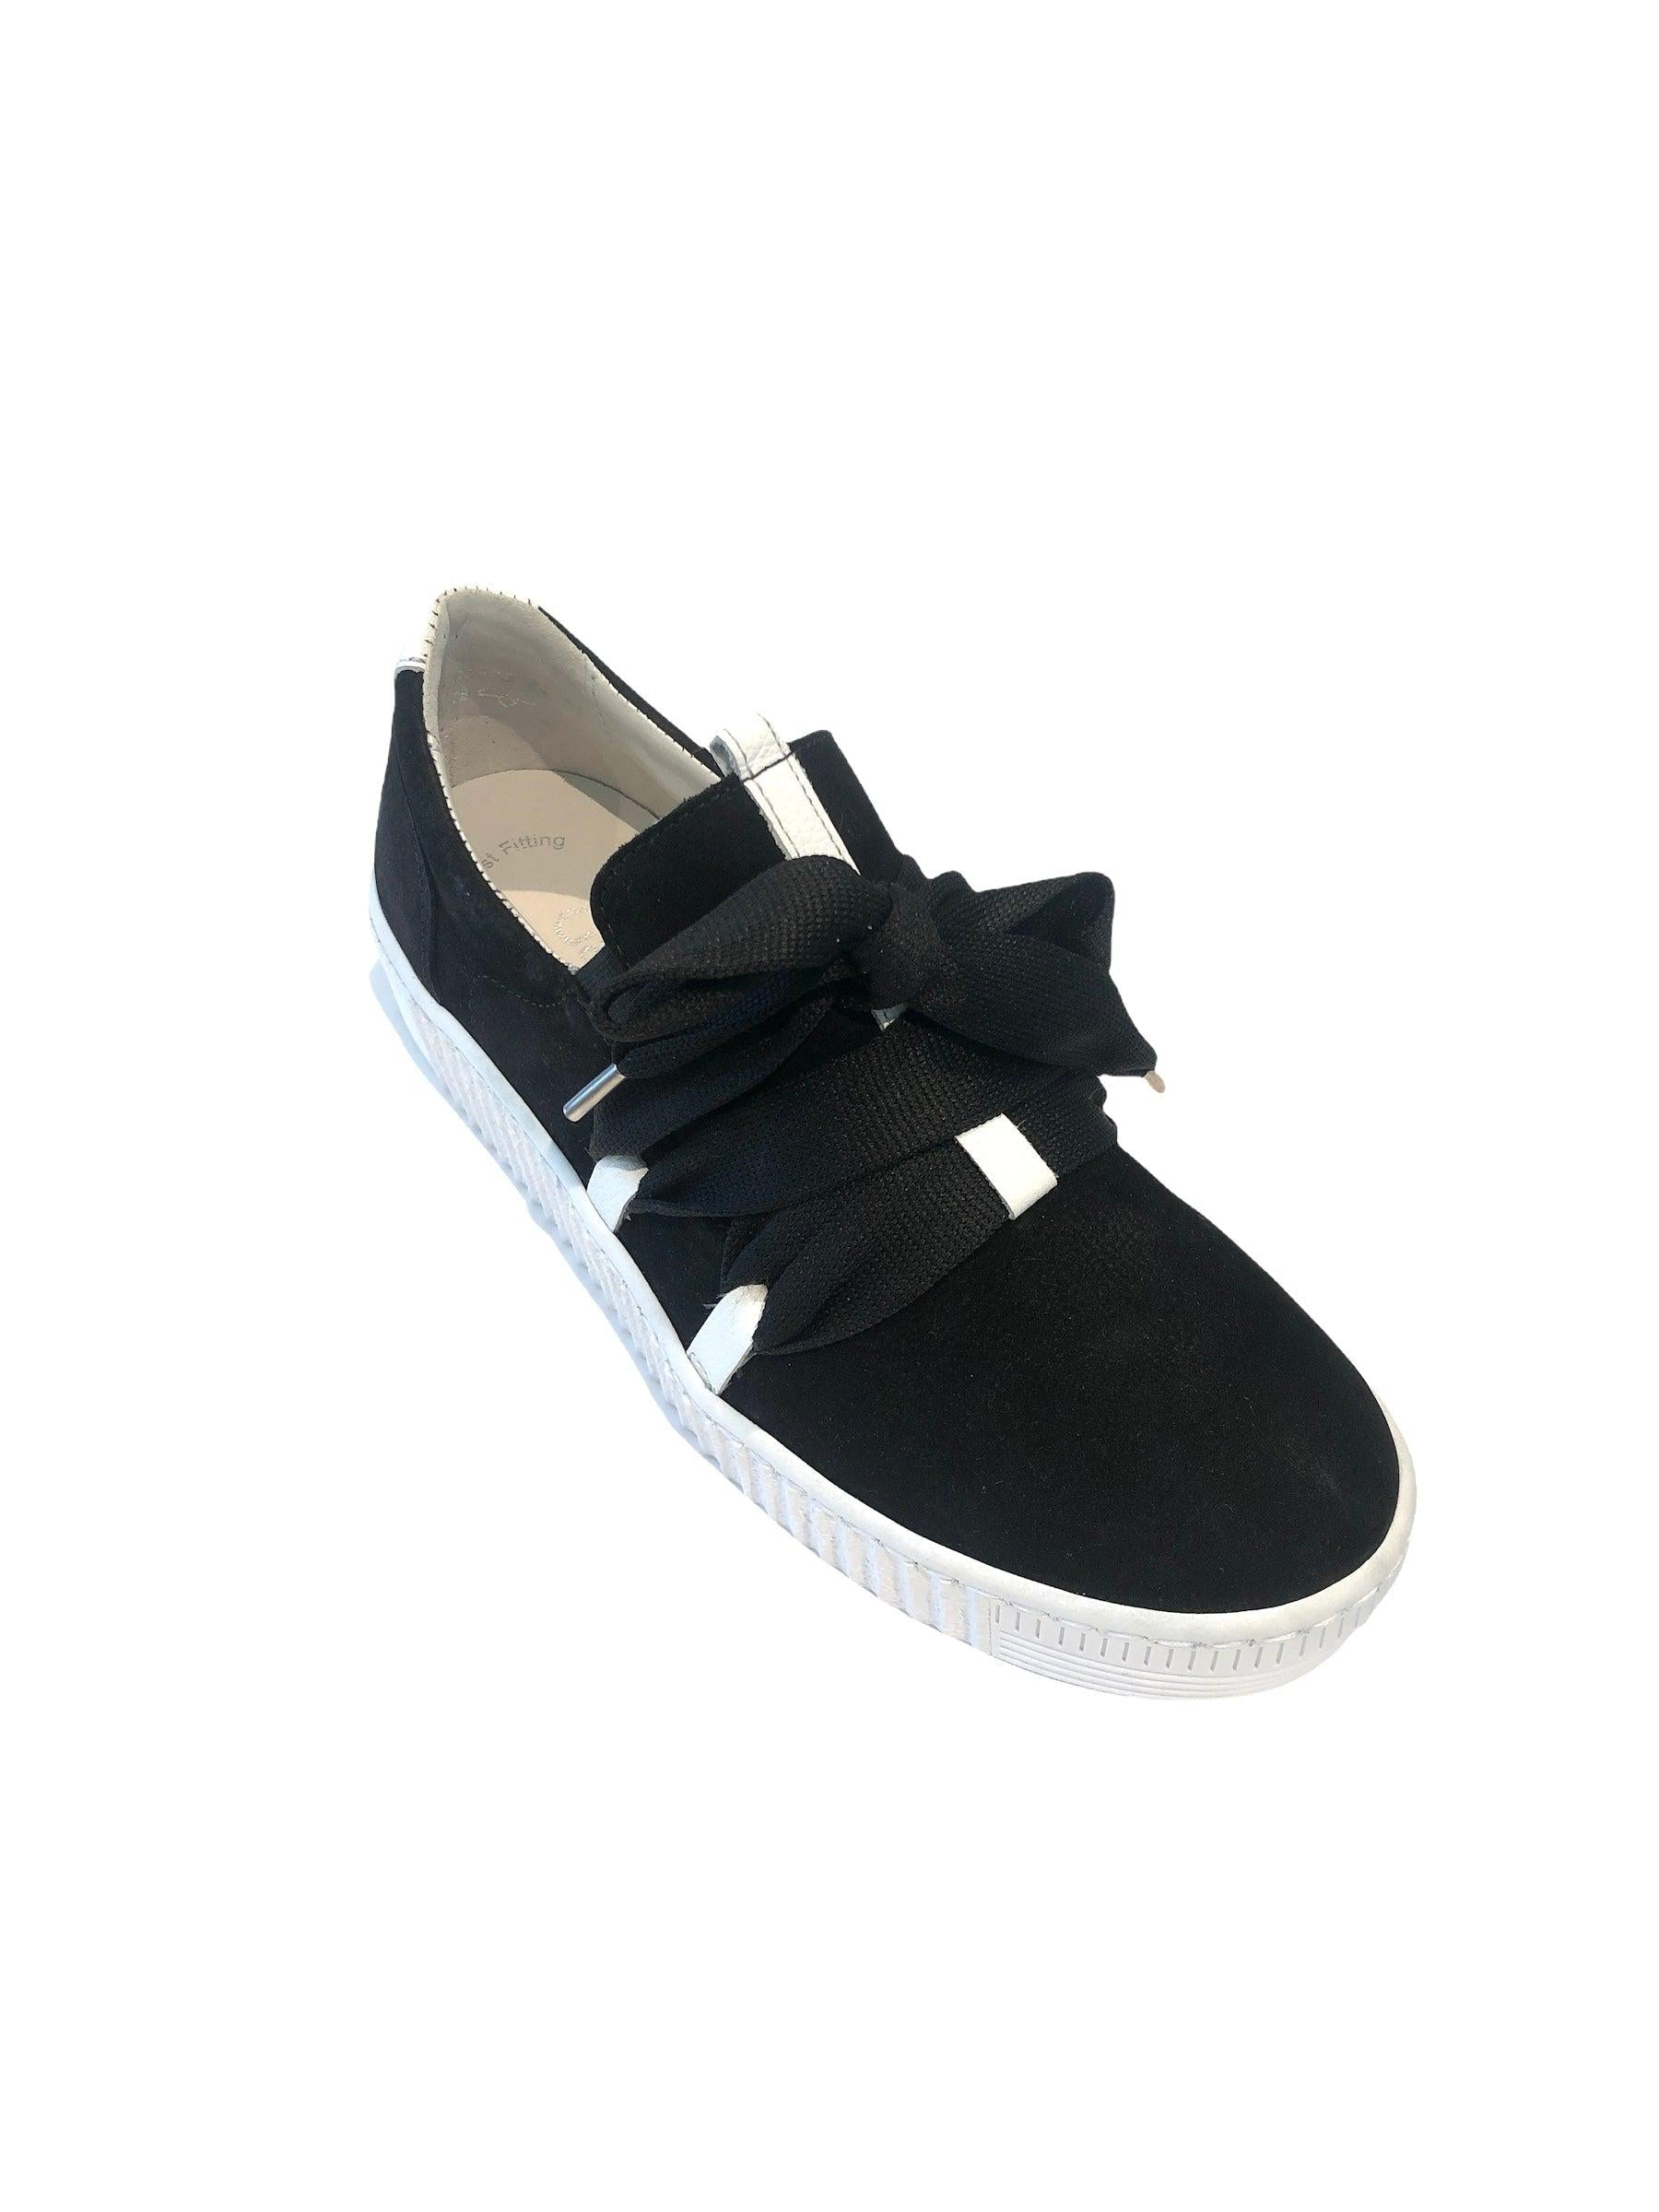 mestre Eve Fest Gabor Sneaker with Tie Two Black/White 83.333. – Planters Exchange